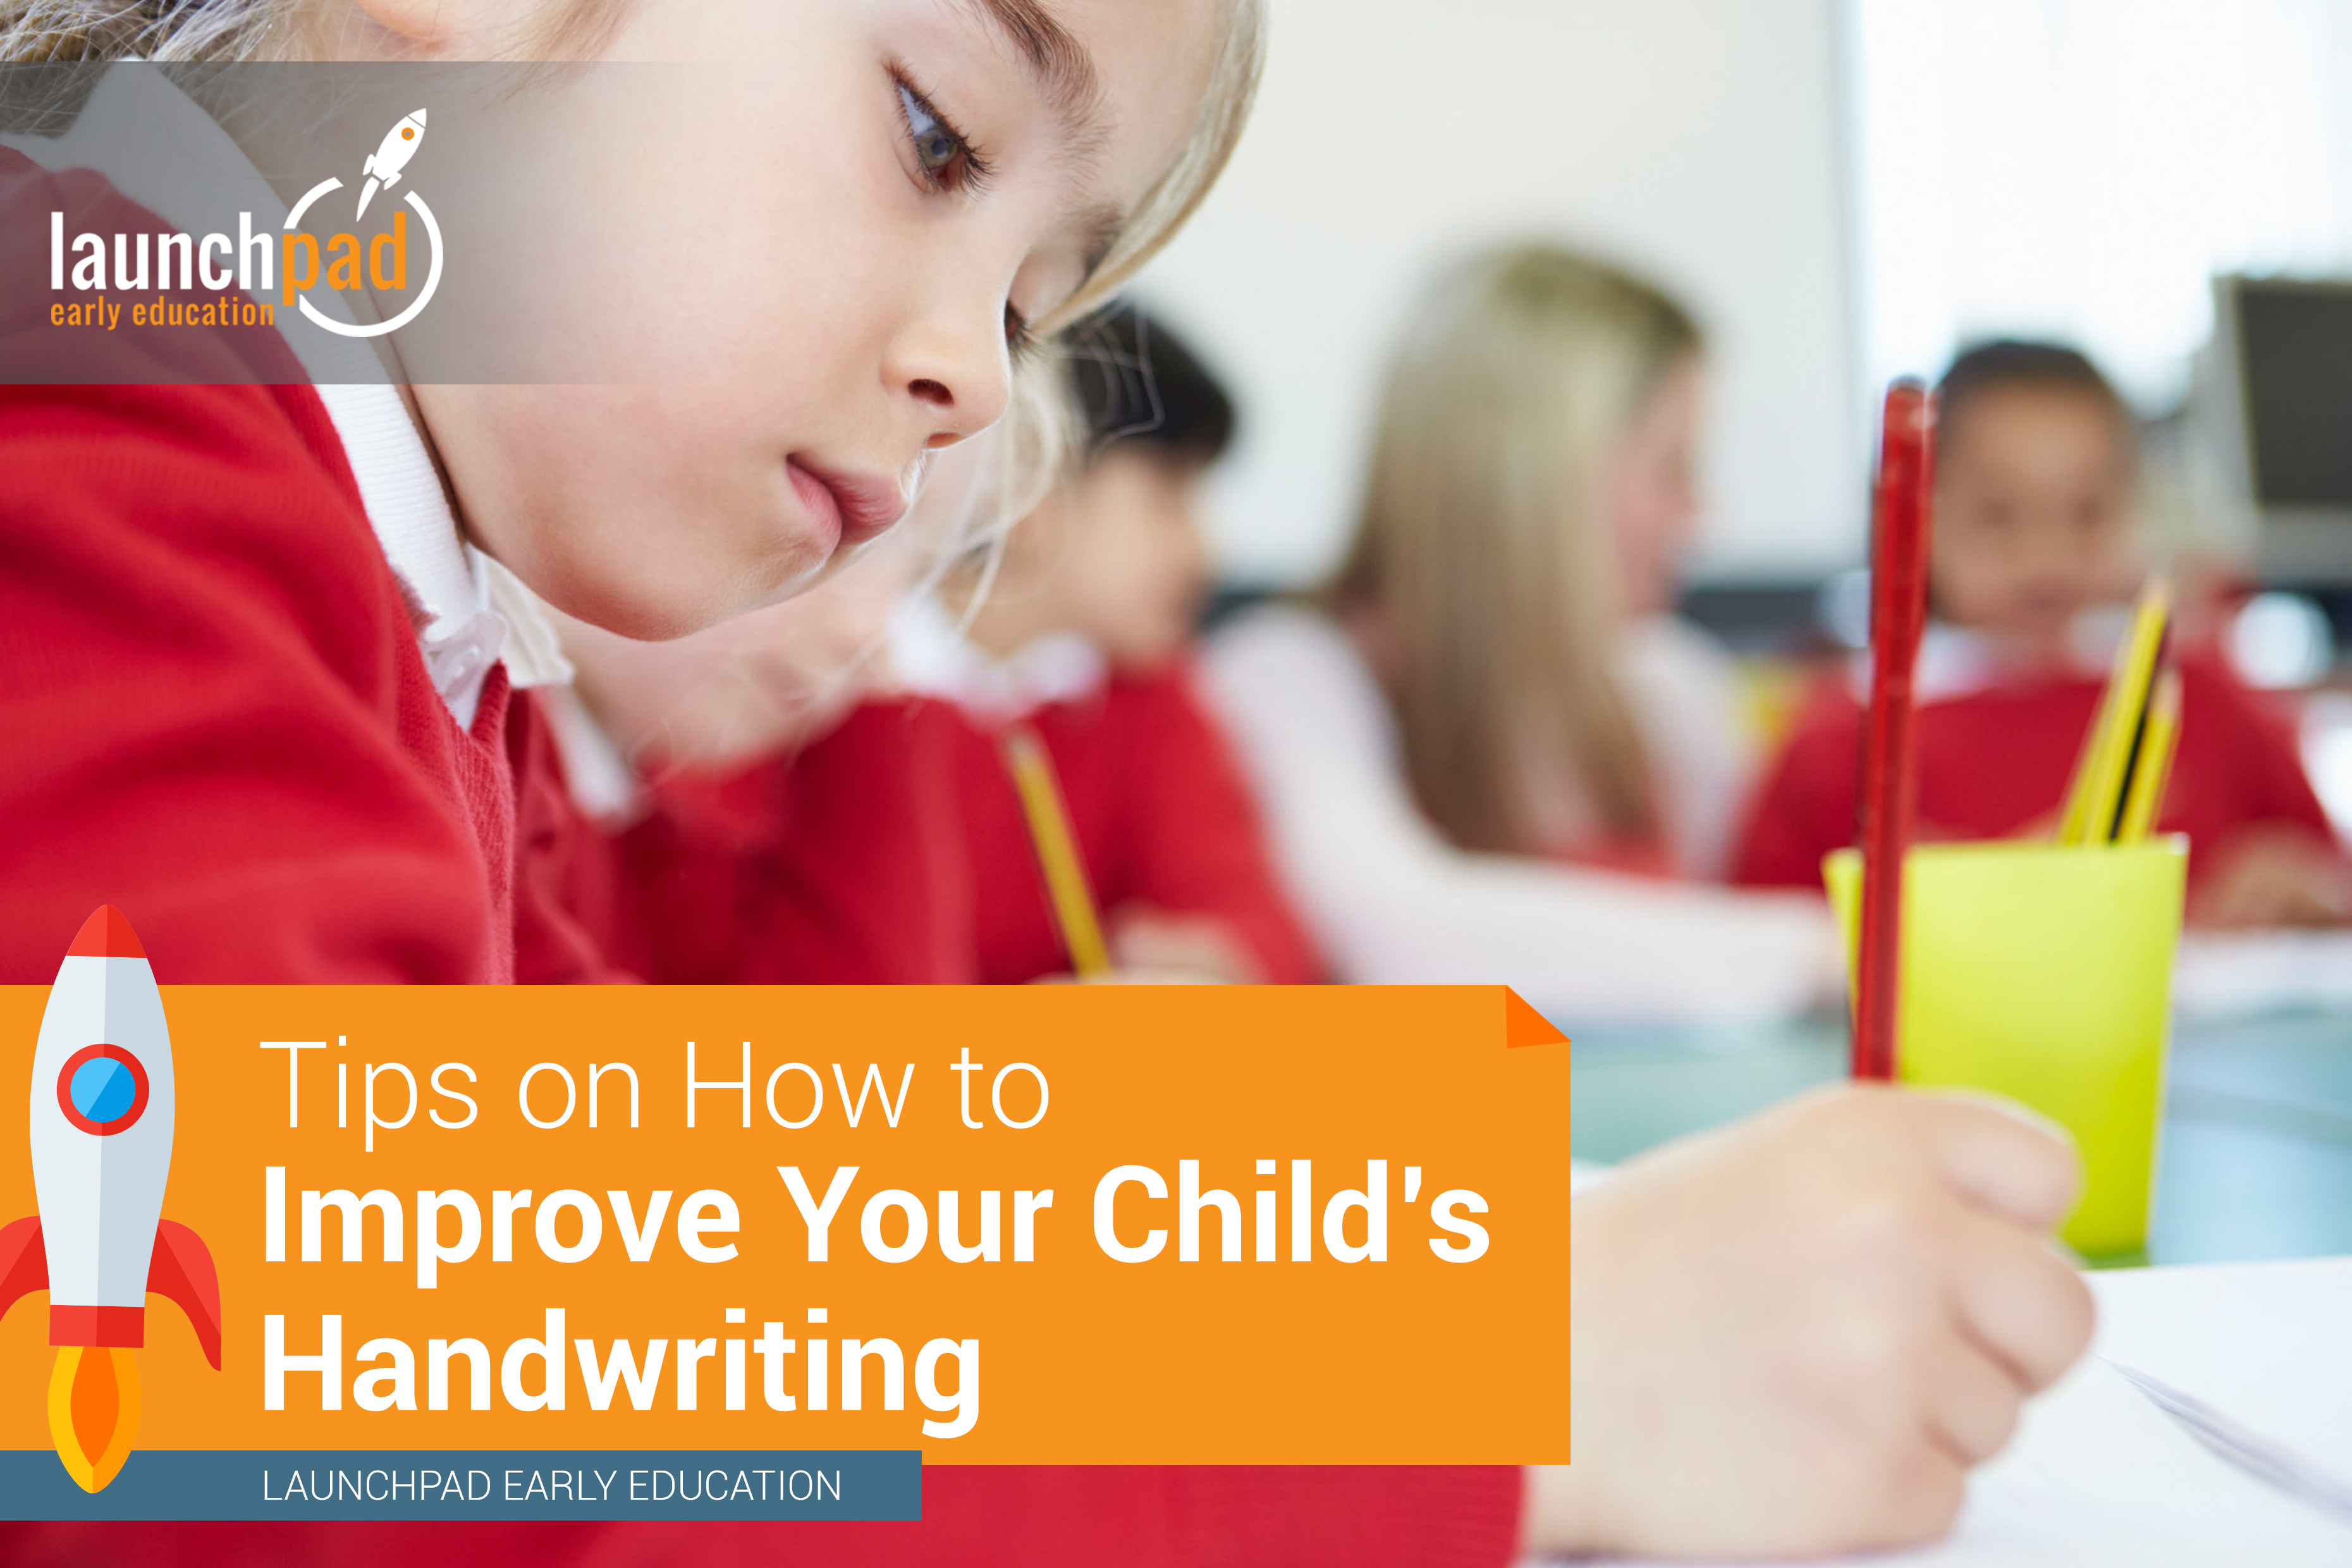 Tips on How to Improve your Child's Handwriting